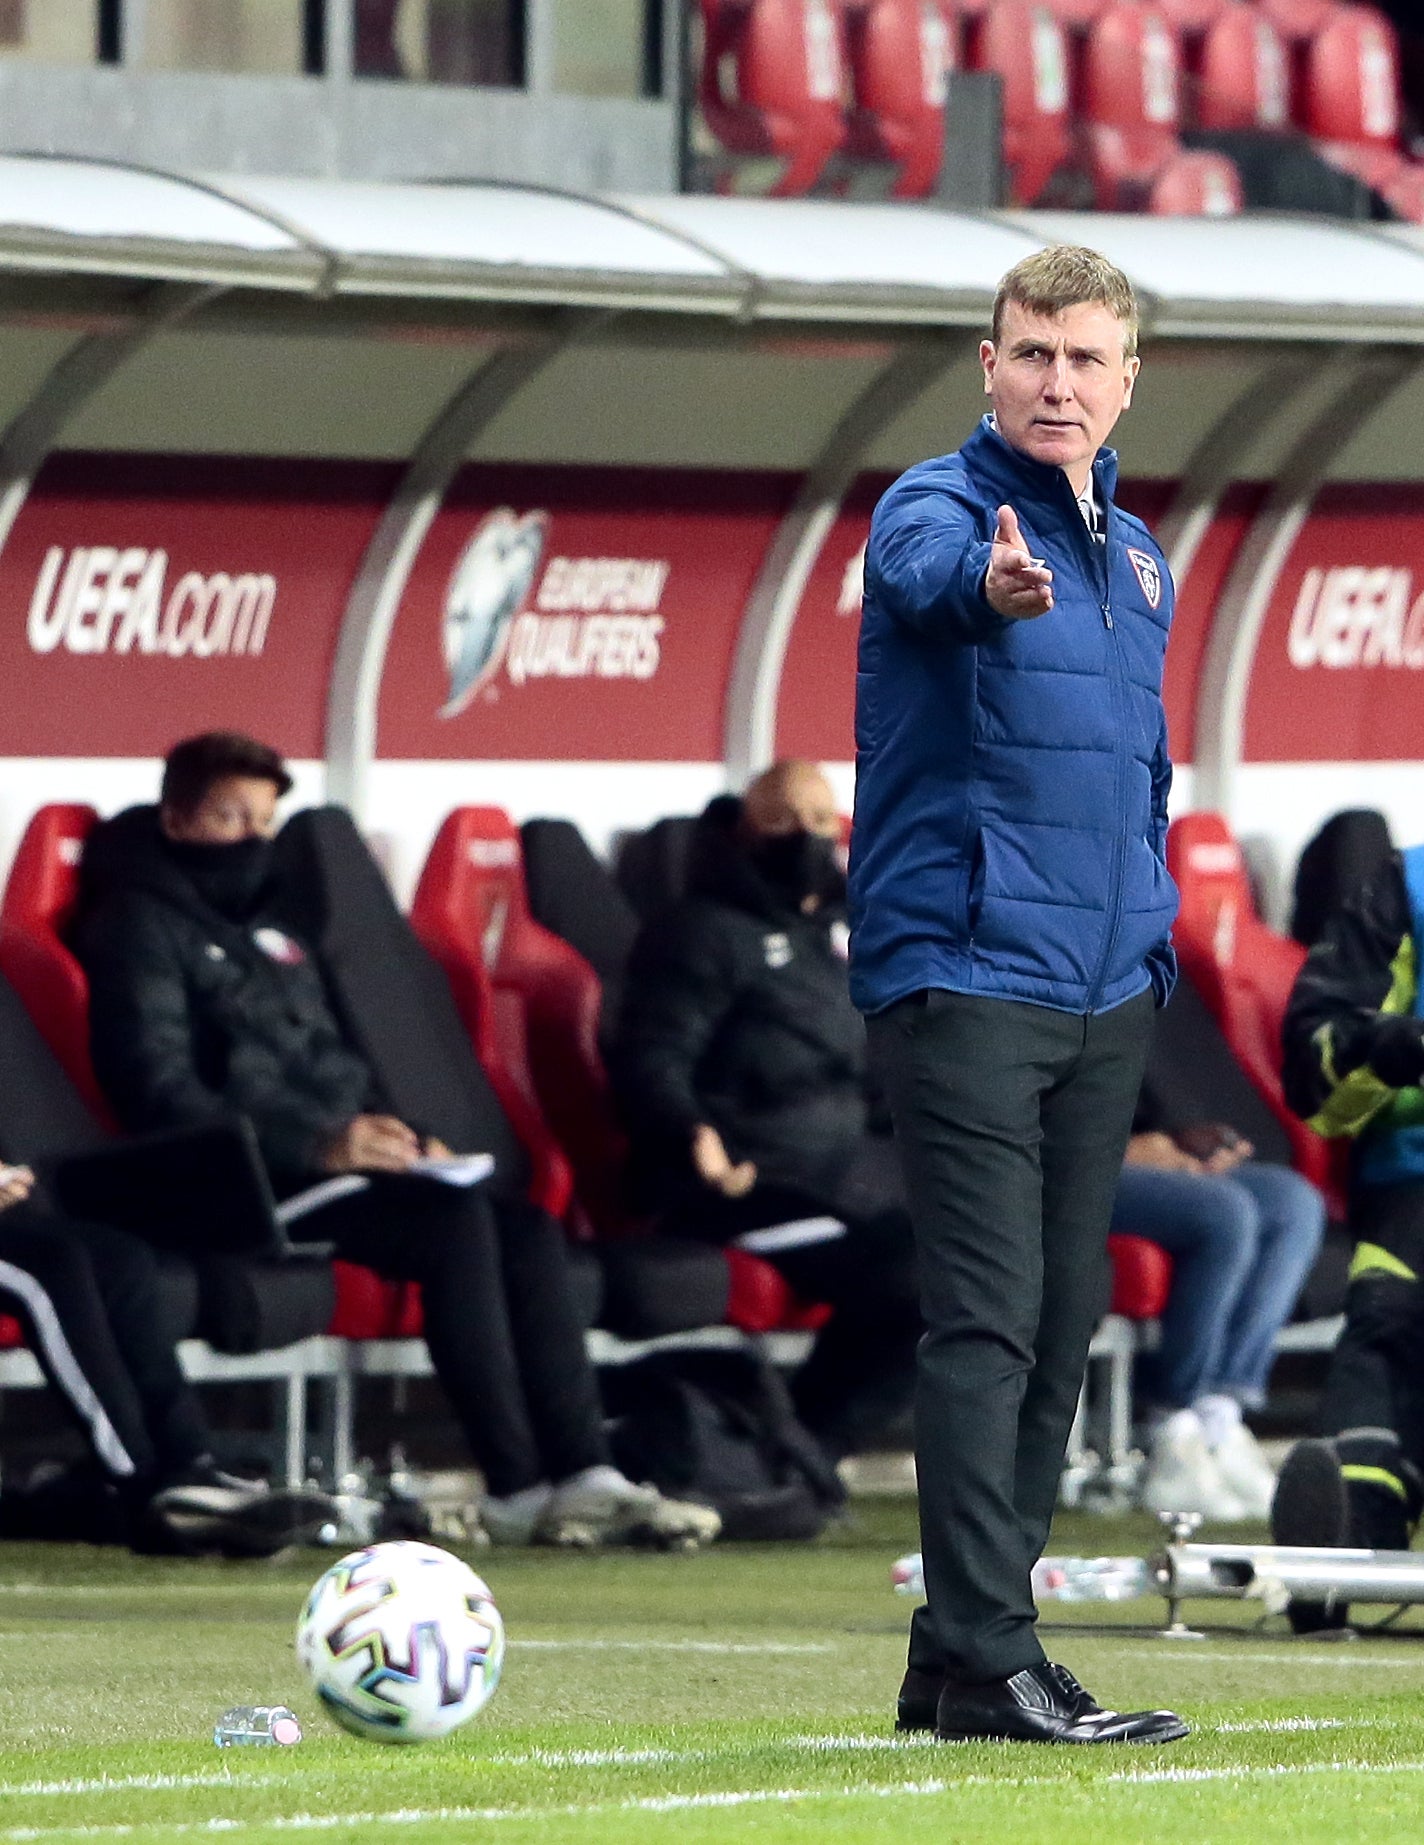 Former Republic of Ireland manager Stephen Kenny has blooded young players in the senior team (Trenka Attila/PA)